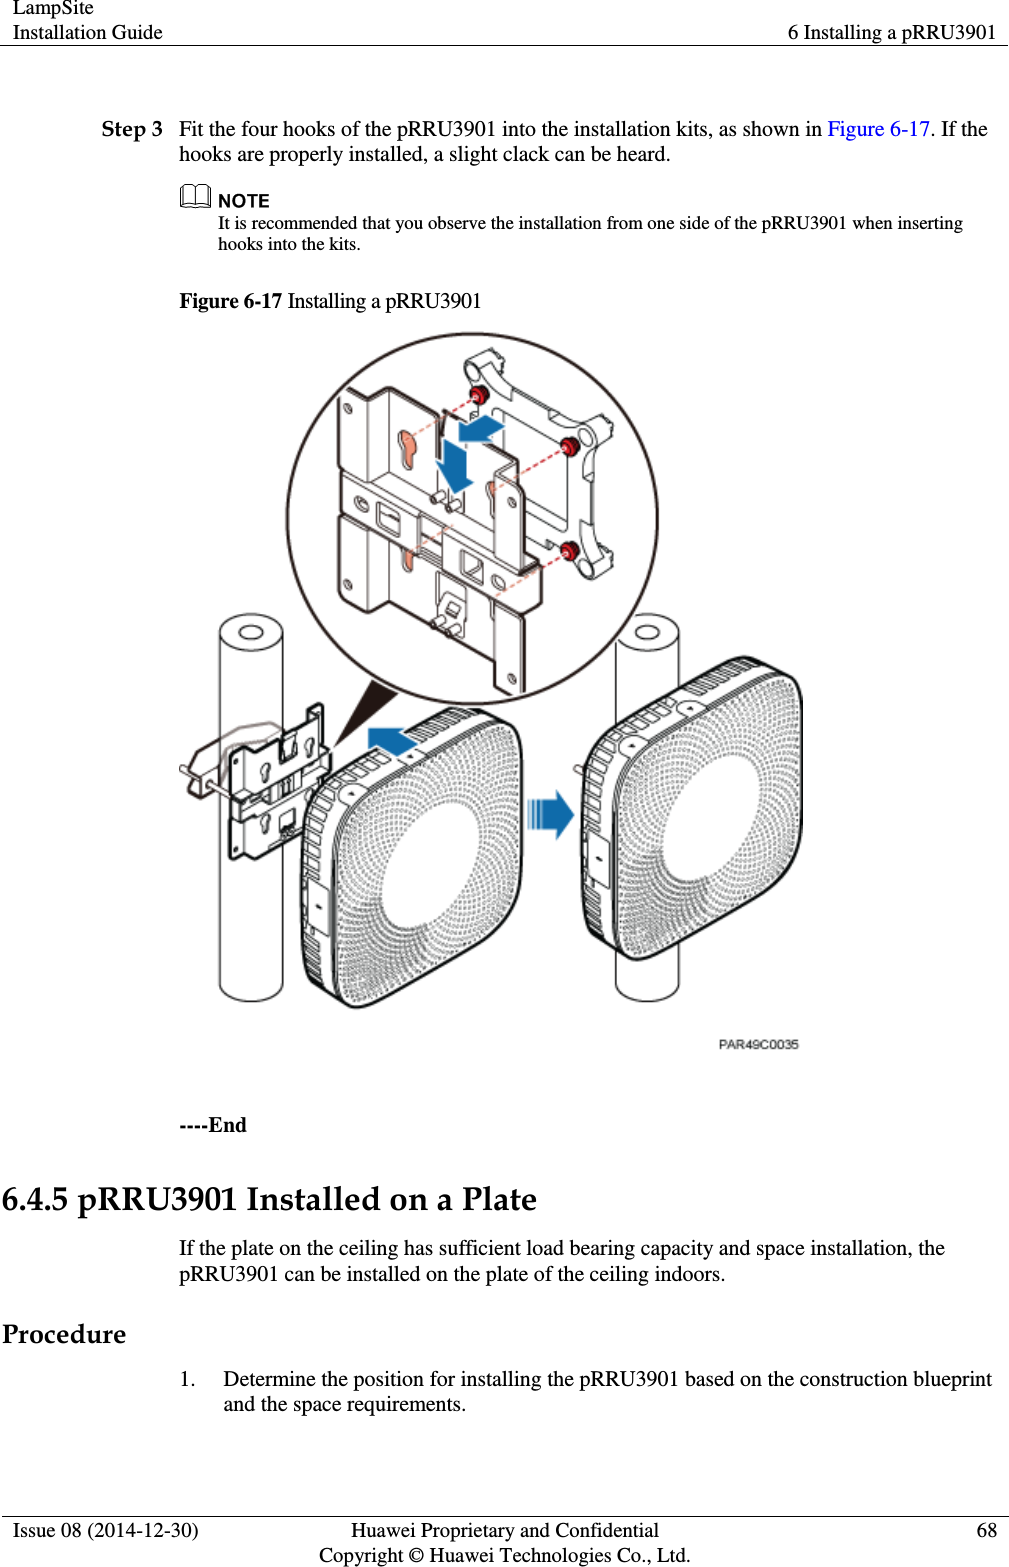 LampSite Installation Guide 6 Installing a pRRU3901  Issue 08 (2014-12-30) Huawei Proprietary and Confidential                                     Copyright © Huawei Technologies Co., Ltd. 68   Step 3 Fit the four hooks of the pRRU3901 into the installation kits, as shown in Figure 6-17. If the hooks are properly installed, a slight clack can be heard.  It is recommended that you observe the installation from one side of the pRRU3901 when inserting hooks into the kits. Figure 6-17 Installing a pRRU3901   ----End 6.4.5 pRRU3901 Installed on a Plate If the plate on the ceiling has sufficient load bearing capacity and space installation, the pRRU3901 can be installed on the plate of the ceiling indoors. Procedure 1. Determine the position for installing the pRRU3901 based on the construction blueprint and the space requirements. 